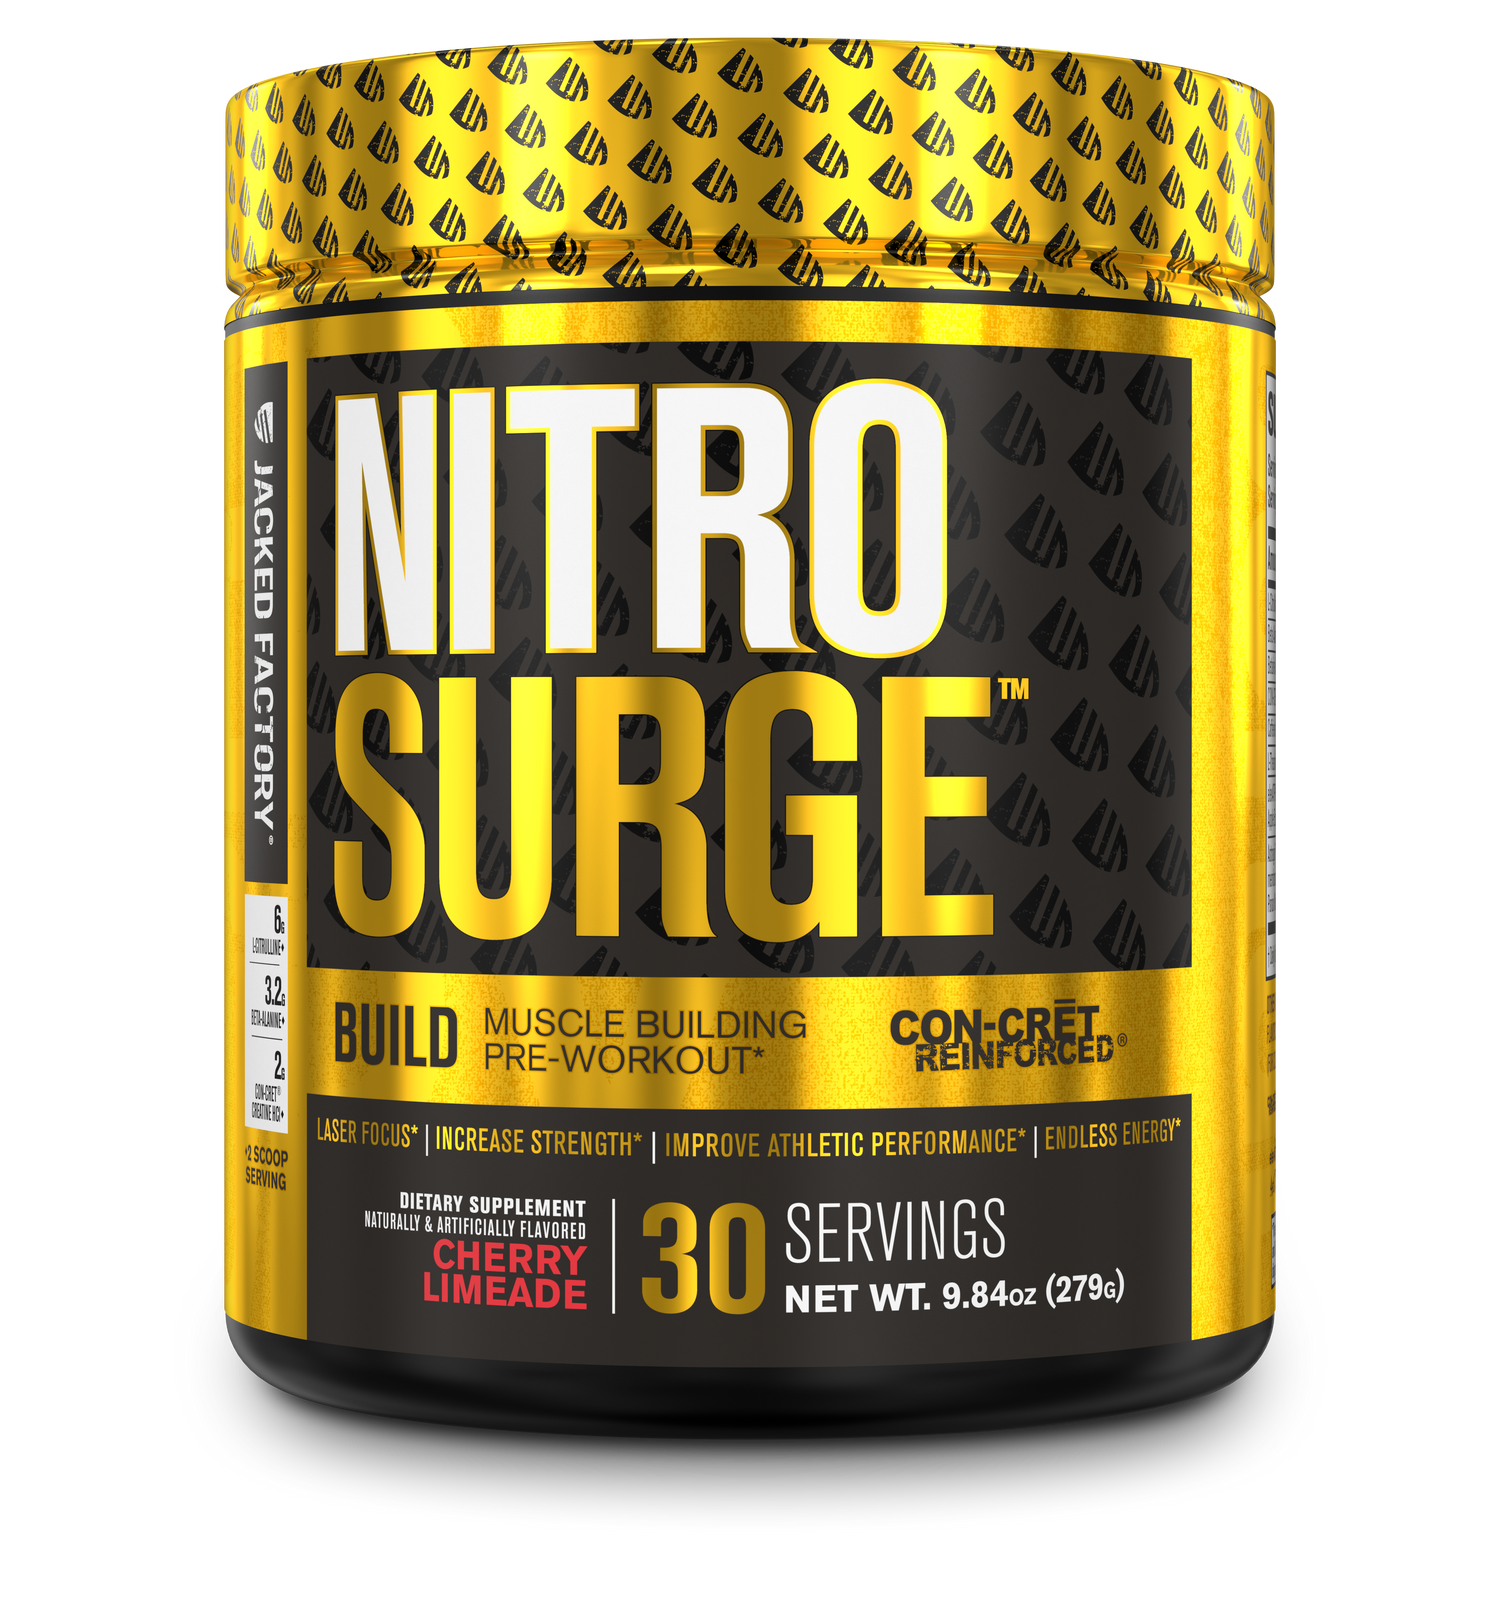 Jacked Factory Nitro Surge Build Cherry Limeade in a black tub with a gold and black label and a gold lid